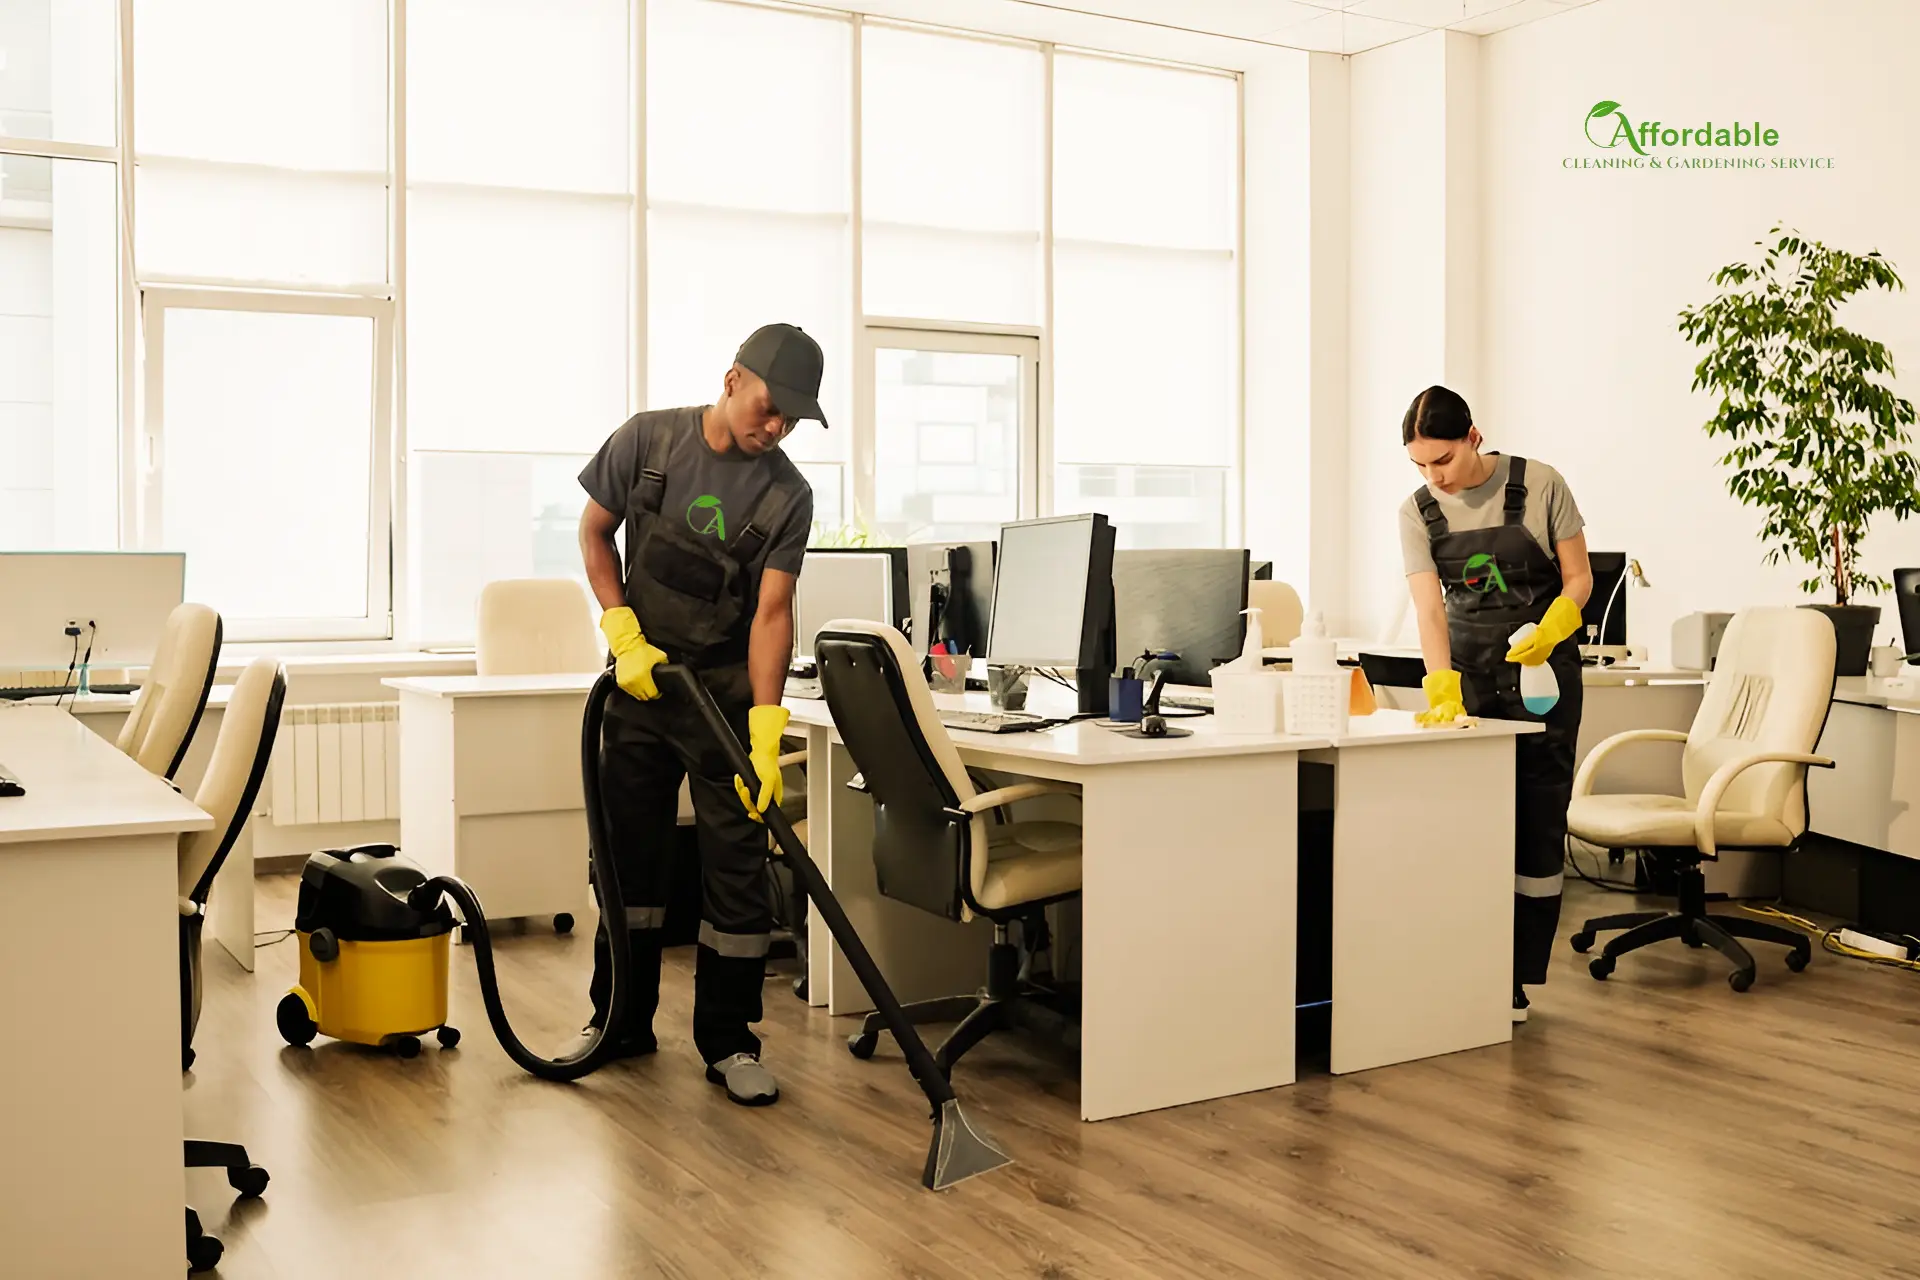 Parramatta commercial janitorial services